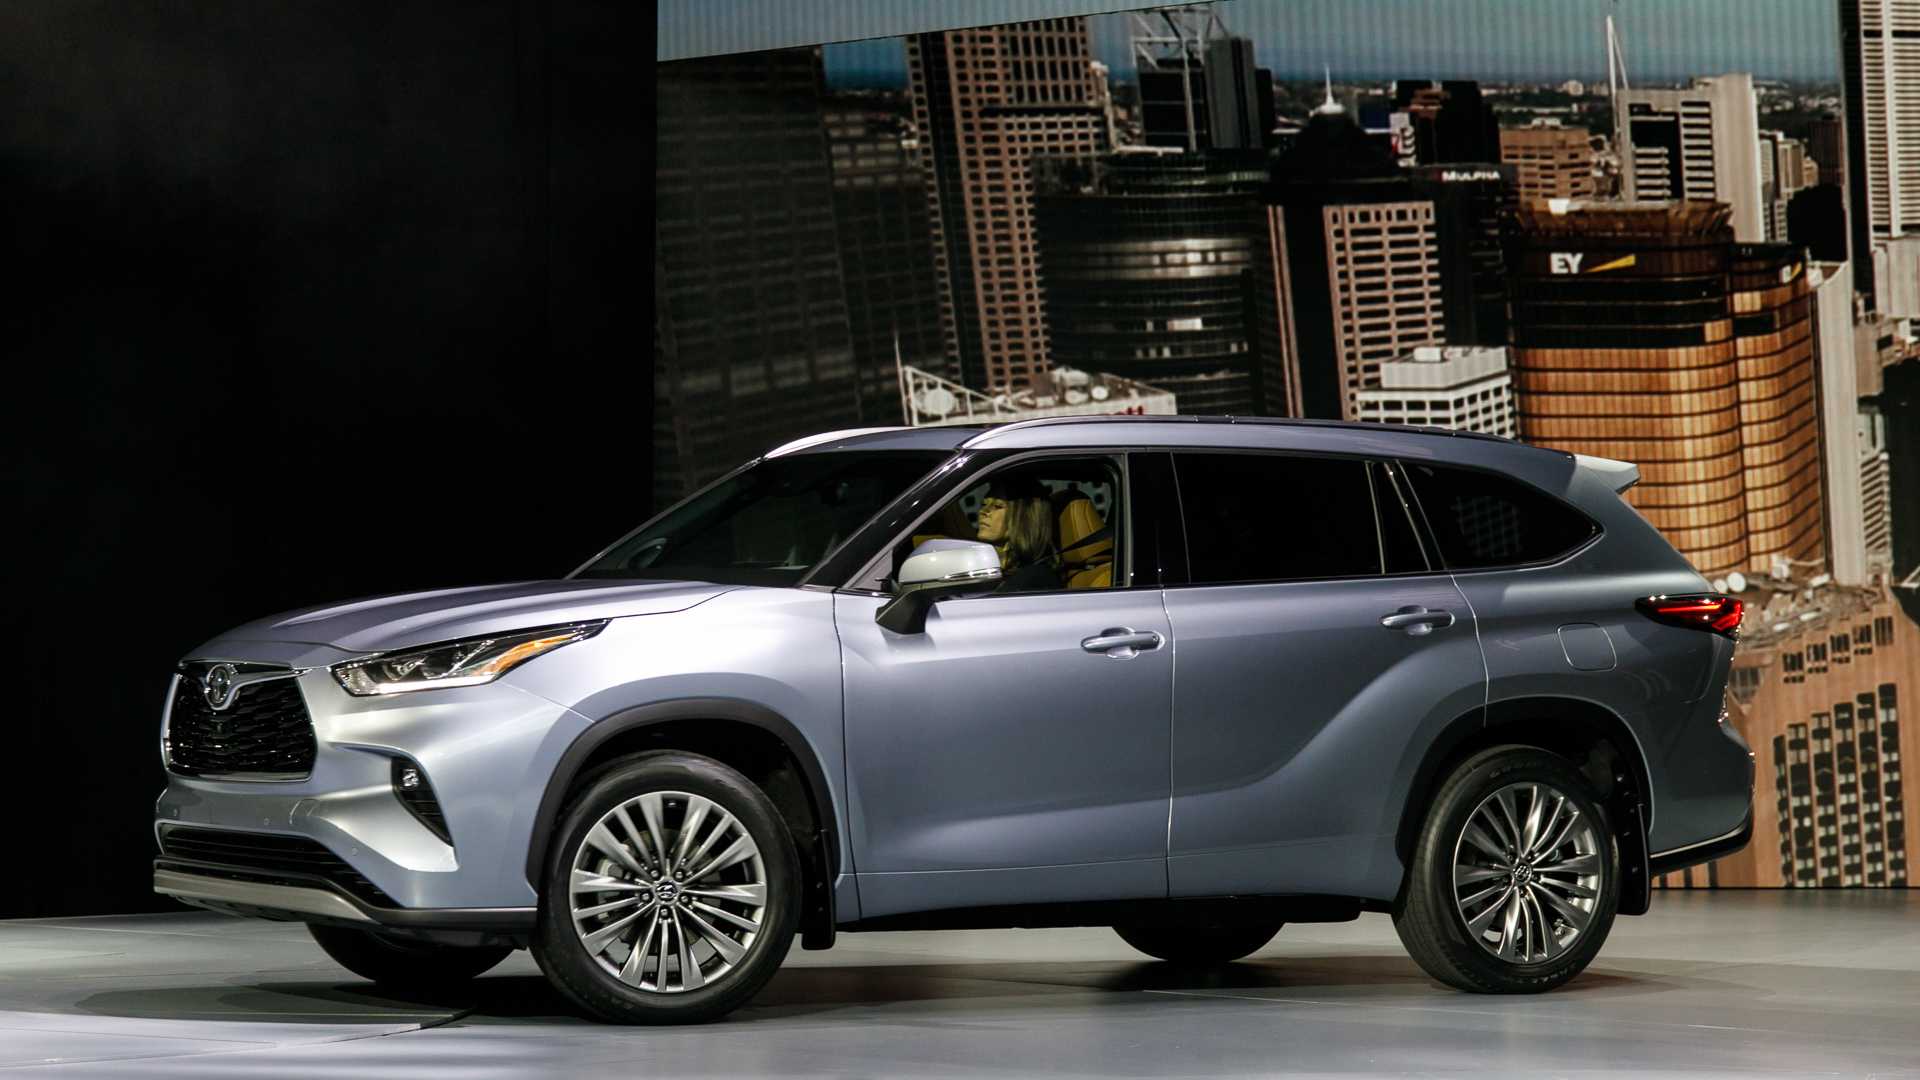 Video: 2020 Toyota Highlander Is The Brand's Best Looking Yet